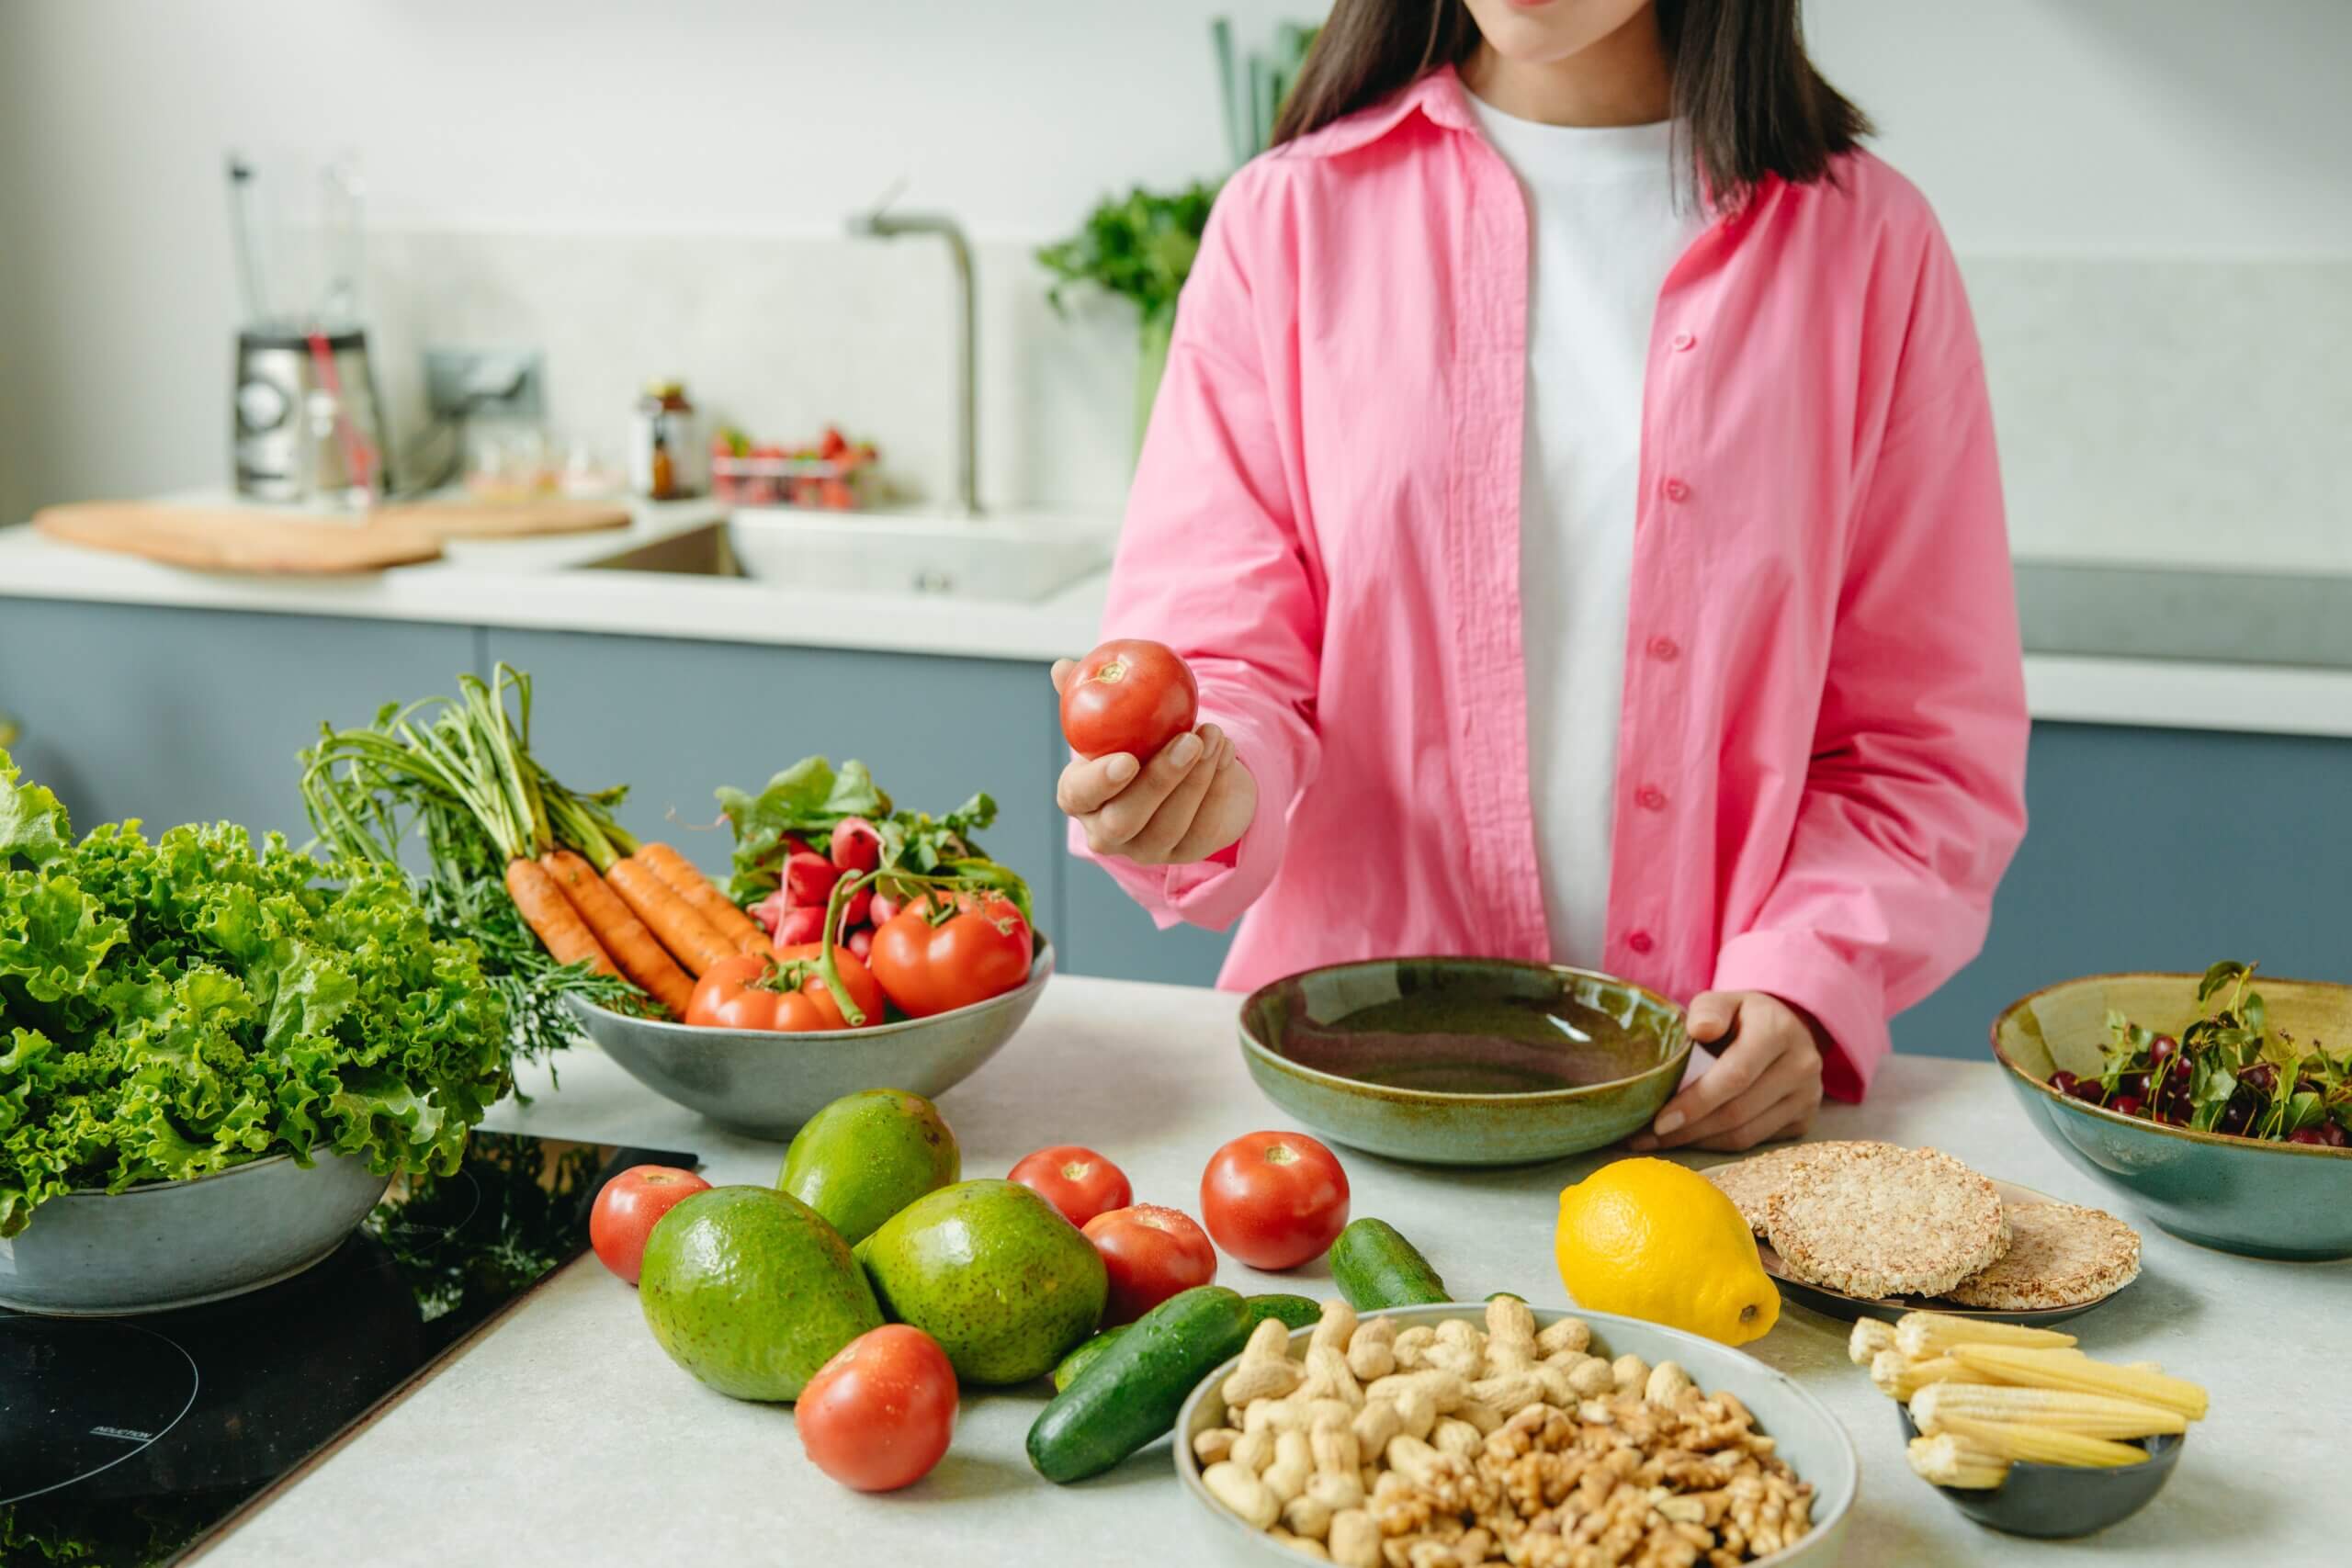 Women's Health | Woman preparing fresh fruits and vegetables for proper diet and wellness.